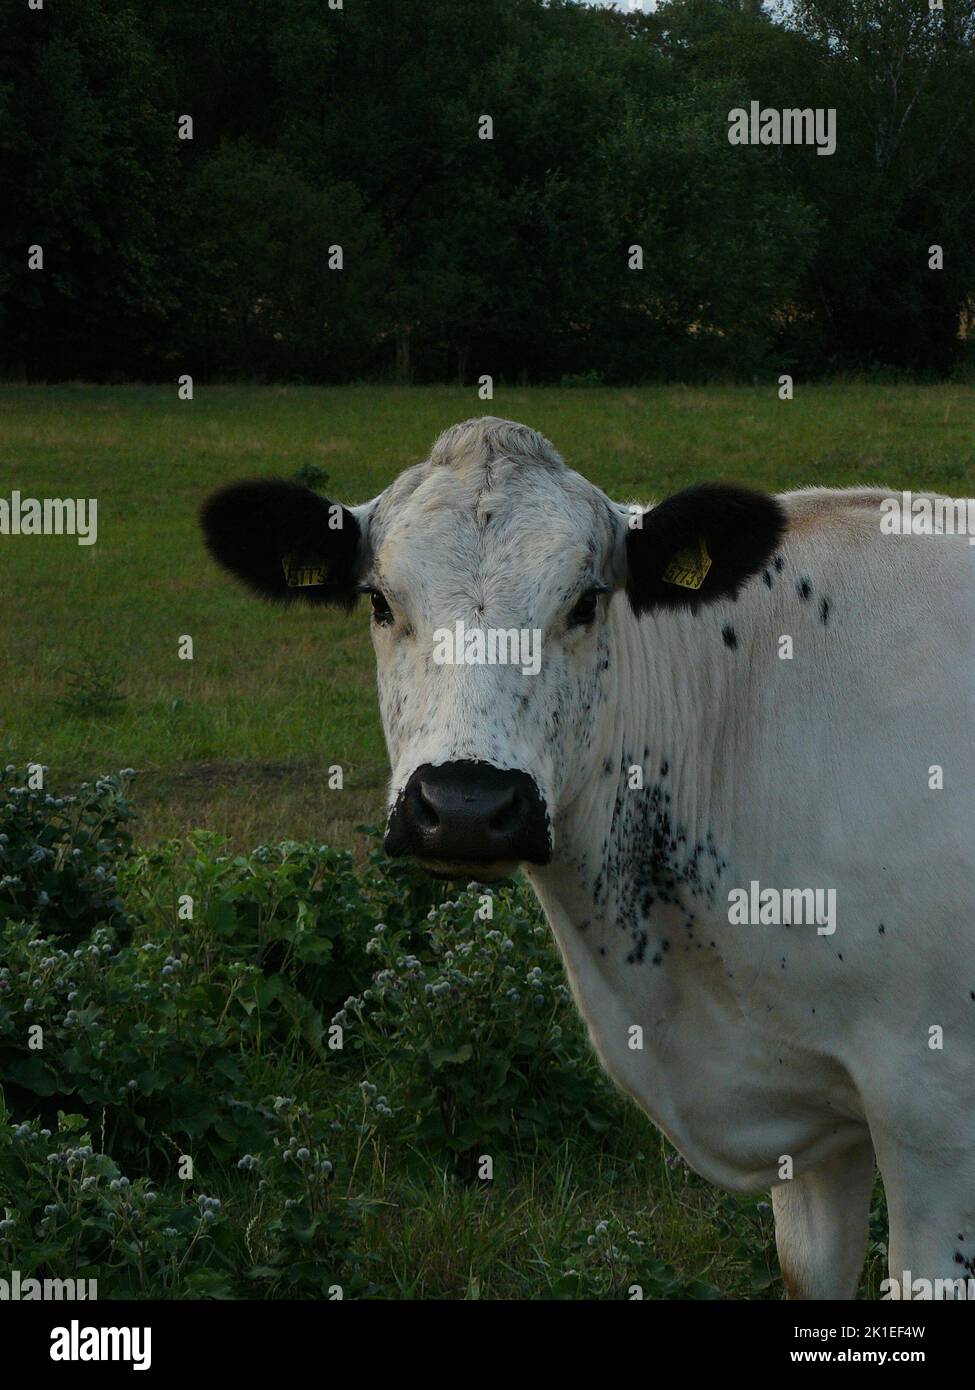 A vertical portrait of a British White cattle standing in a green pasture Stock Photo